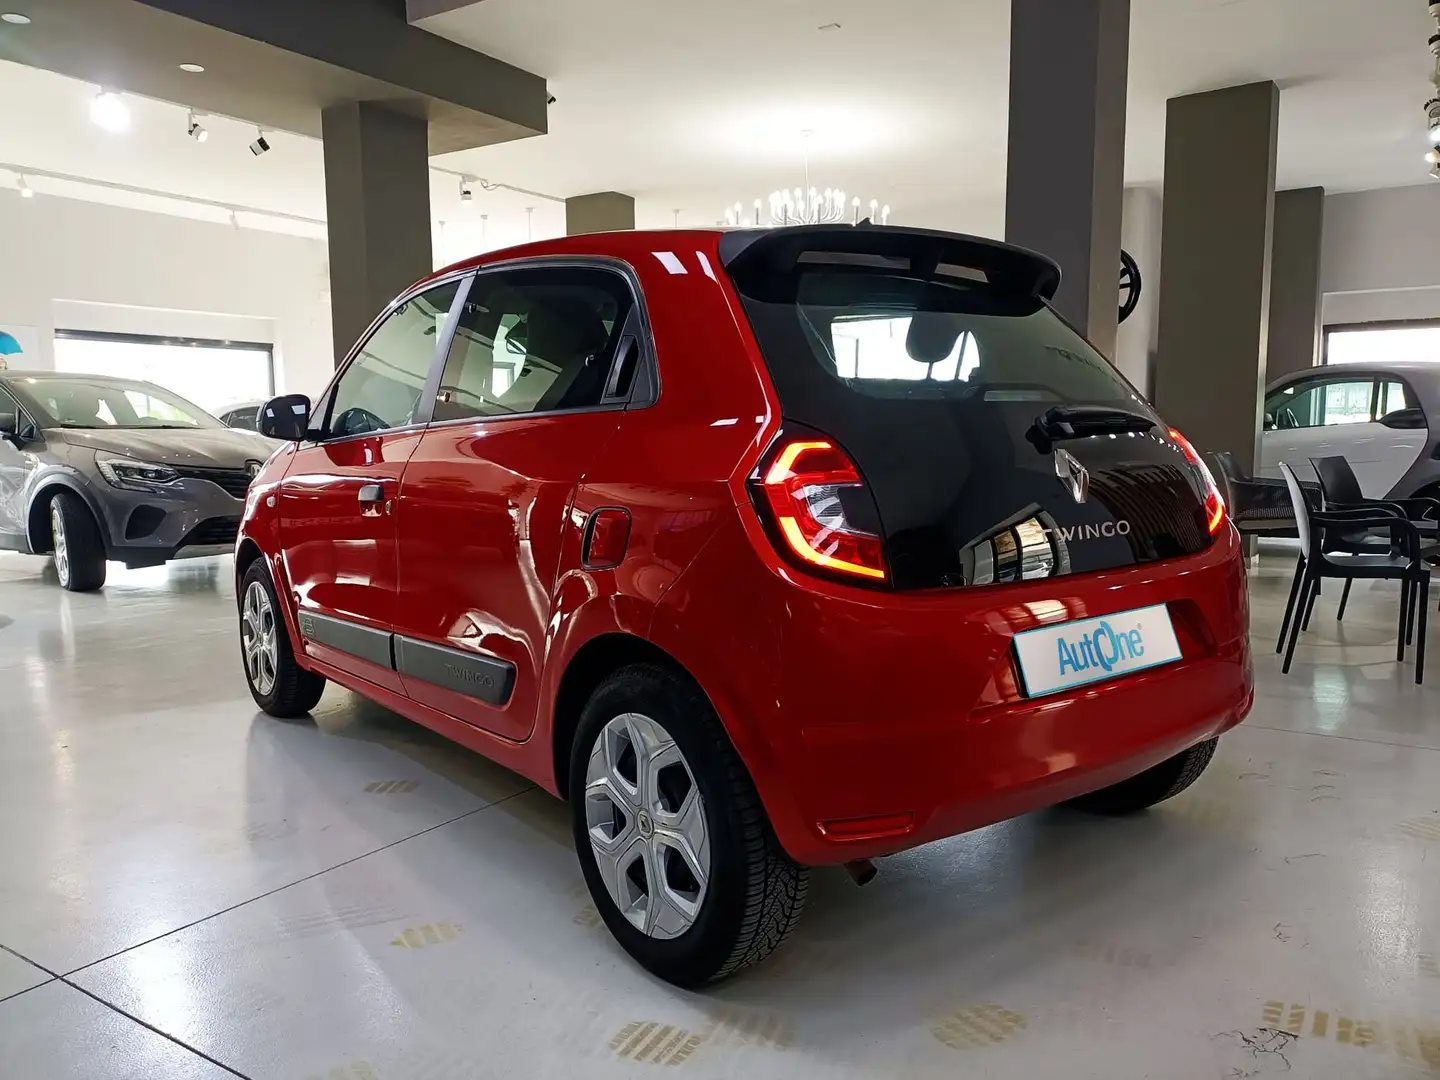 Renault Twingo 1.0 65CV S&S LIFE - LED CLIMA R&GO CONNECT Red - 2